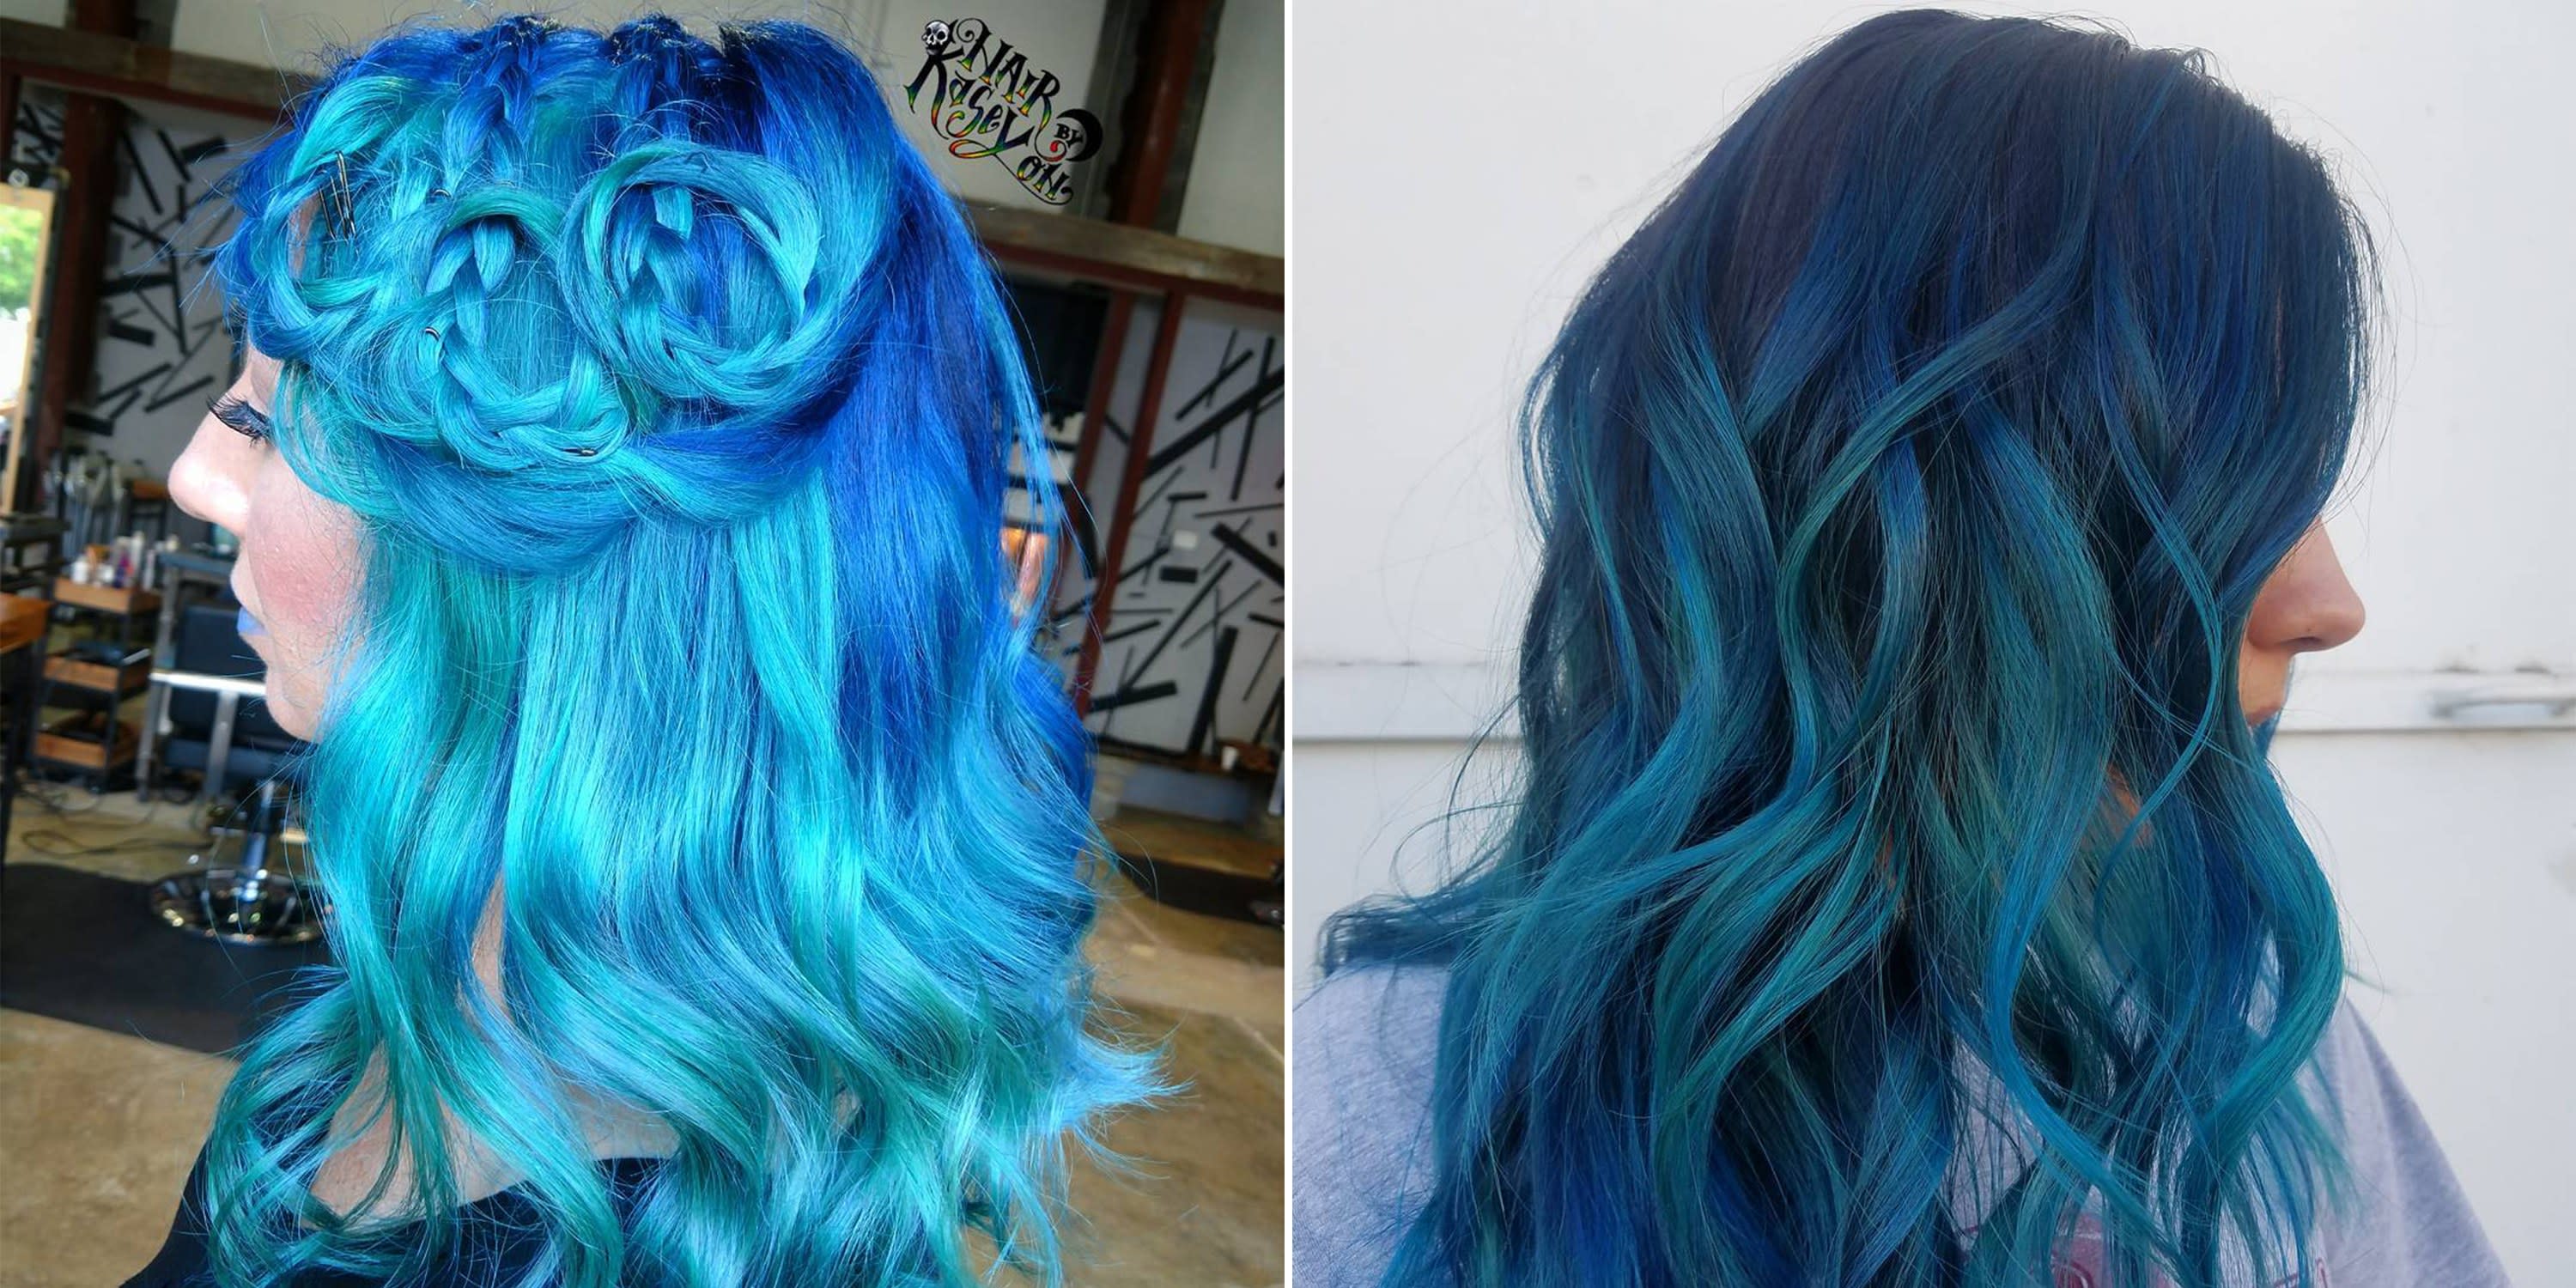 7. How to Care for and Maintain "Dirty Blue" Hair Color - wide 10